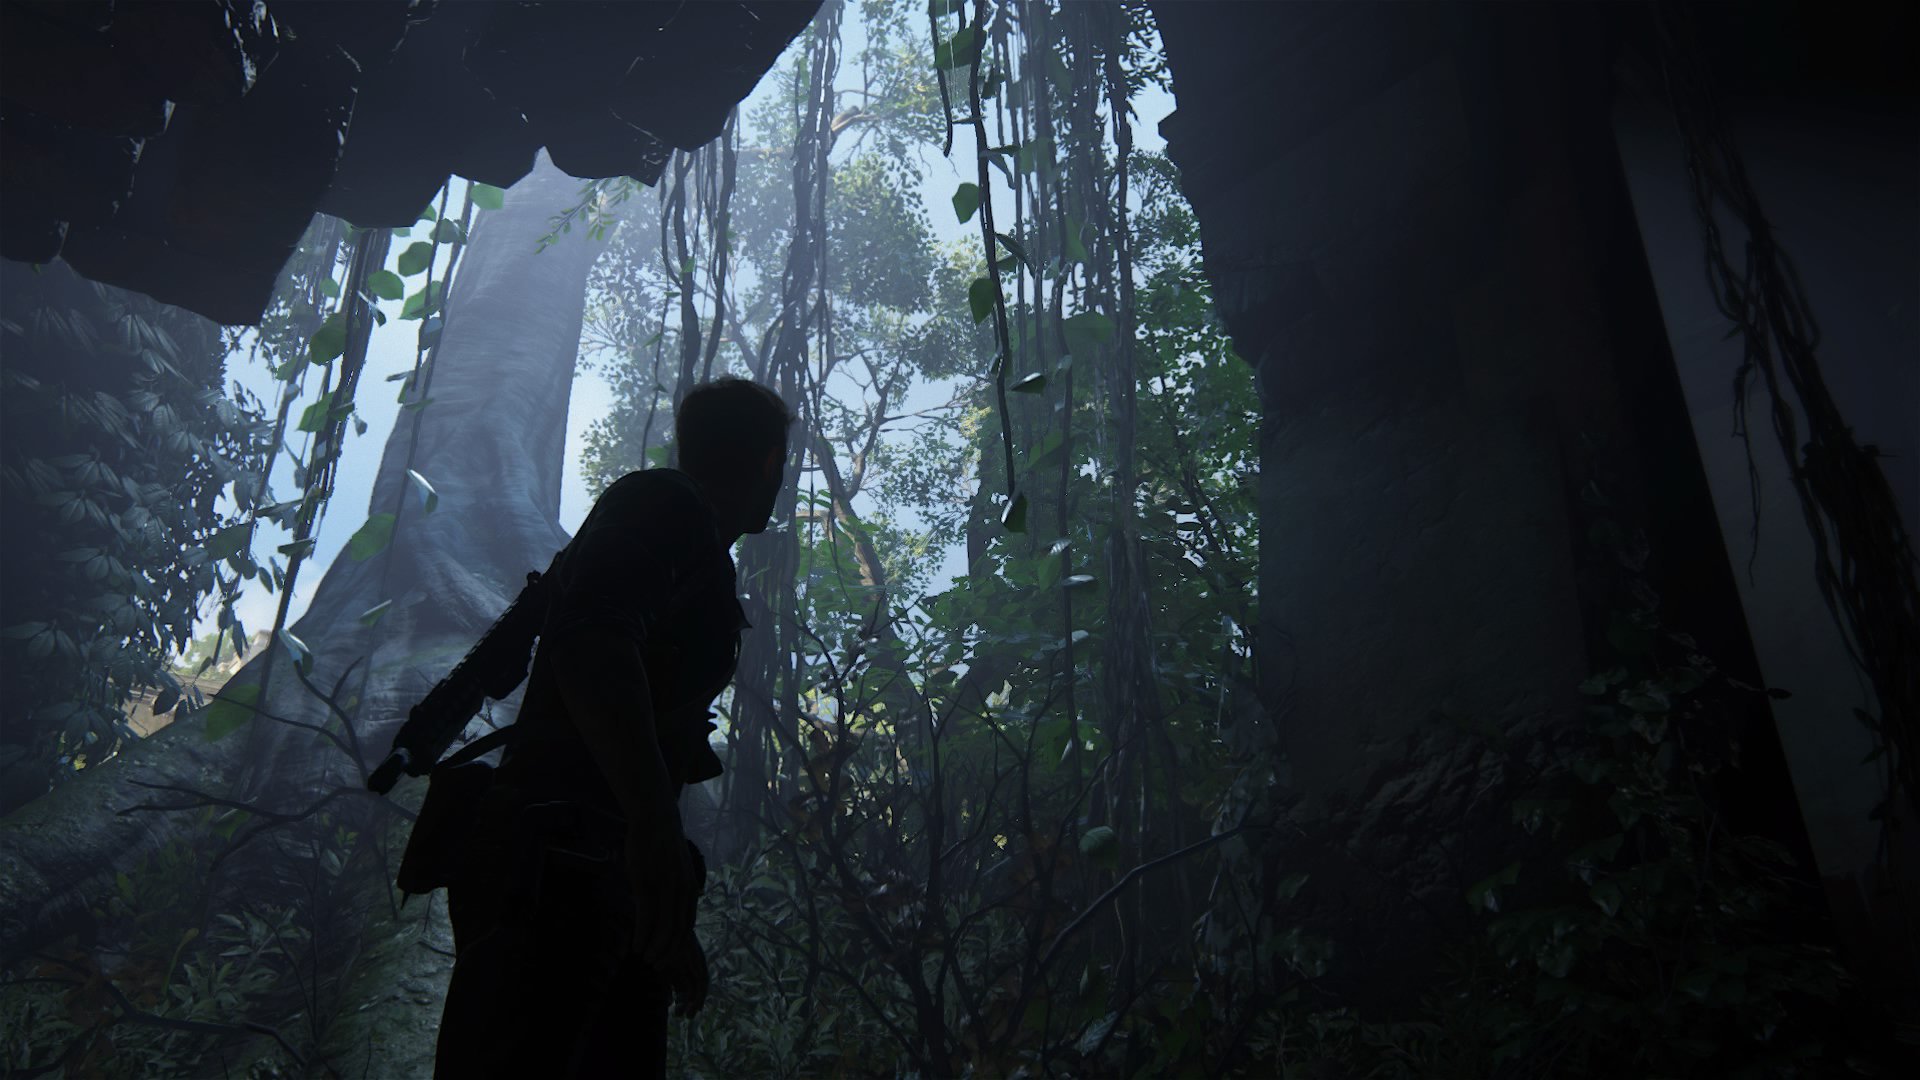 Screenshot Uncharted 4 A Thief's End